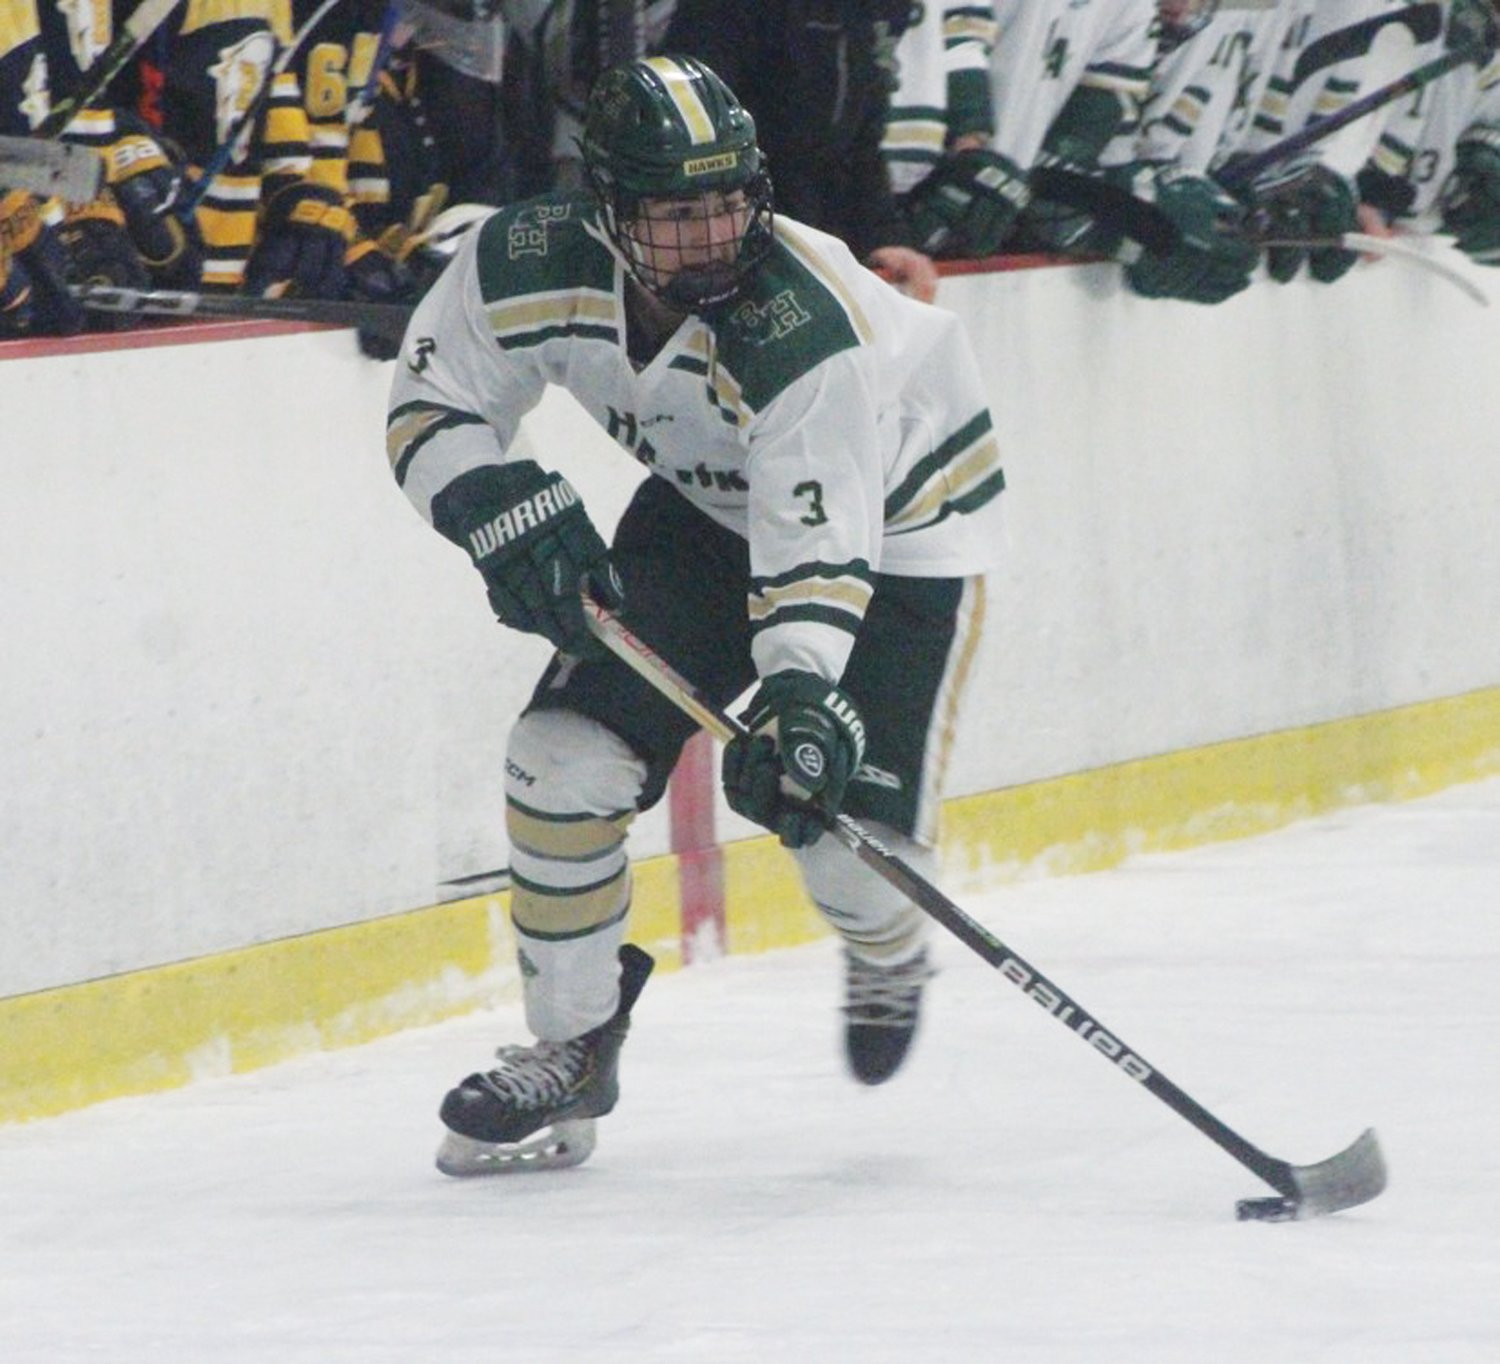 Bishop Hendricken hockey player Griffin Crain. The senior leader had two big performances in the Division I Quarterfinals and led the Hawks to the 2-0 series sweep over Barrington. Crain scored a combined four goals, including a hat trick in Game 2 to propel the Hawks to this weekend’s Frozen Four matchup against the Warwick co-op. Pictured is Crain last week. (Photo by Alex Sponseller)